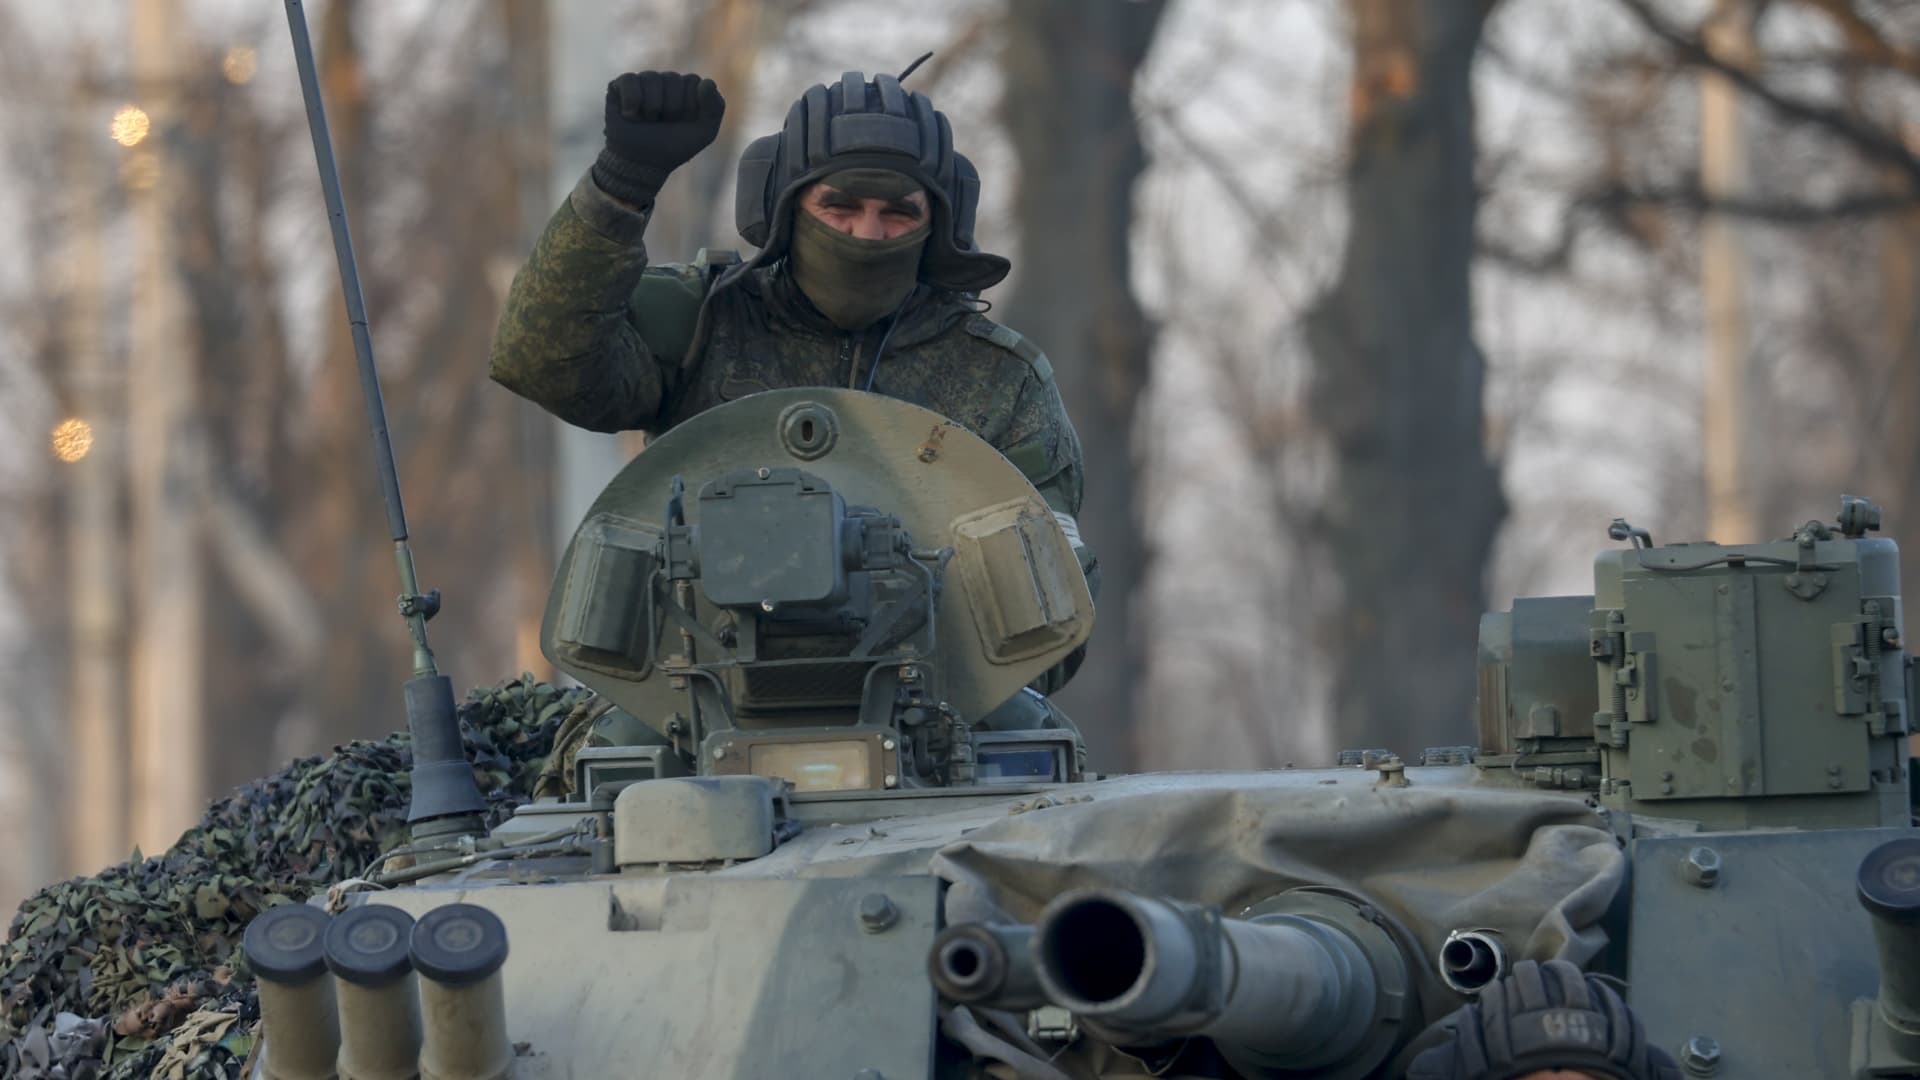 Russia claims to have changed its strategy in Ukraine — but there are doubts over its real intentions